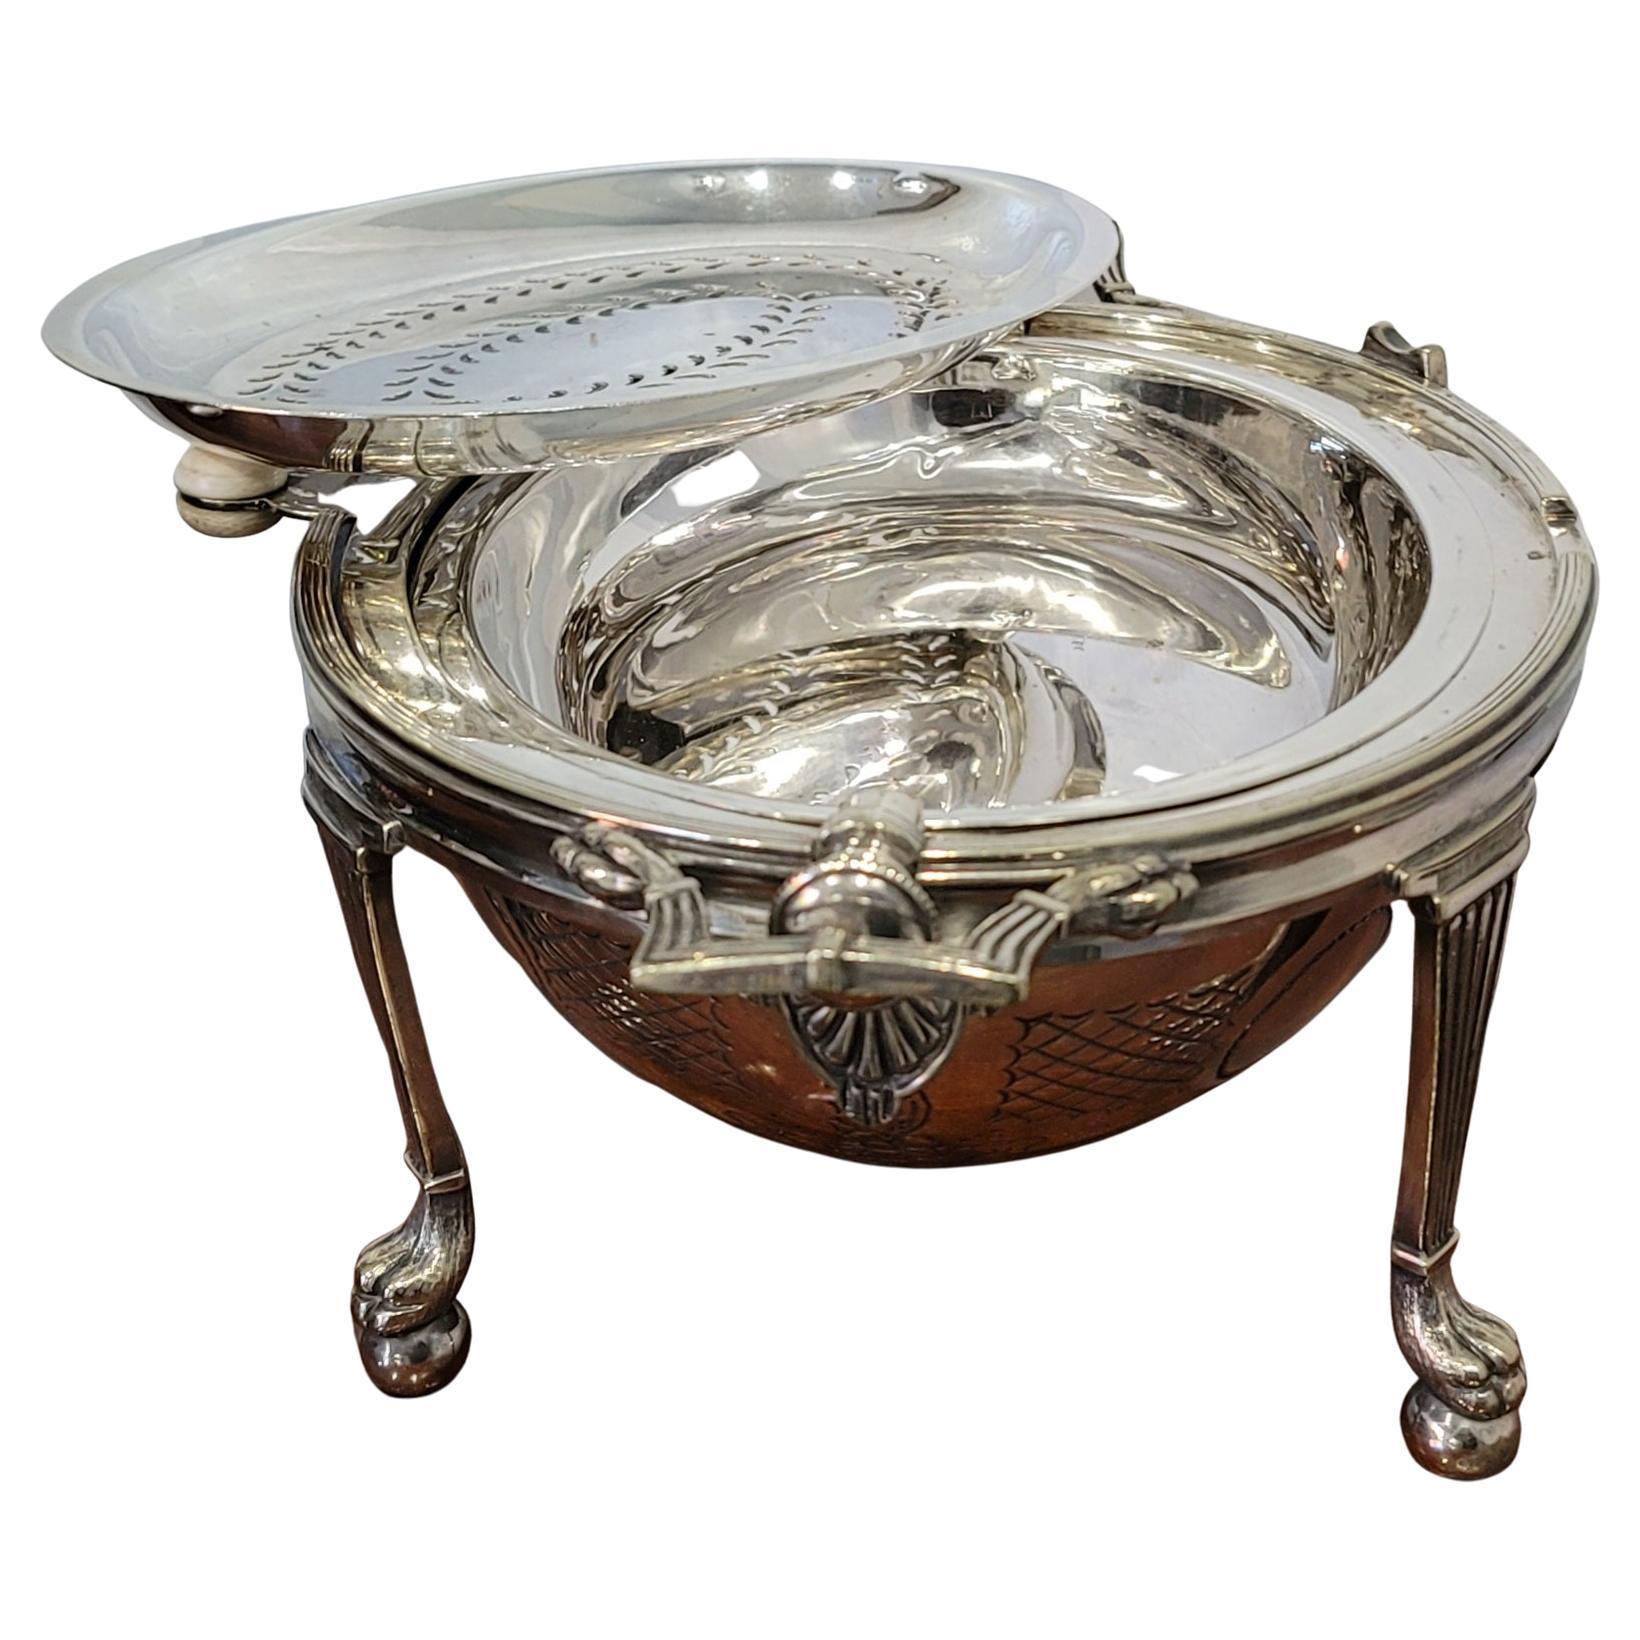 1890s Drew & Sons Revolving Electroplate Silver Oval Serving Dish In Good Condition For Sale In Germantown, MD